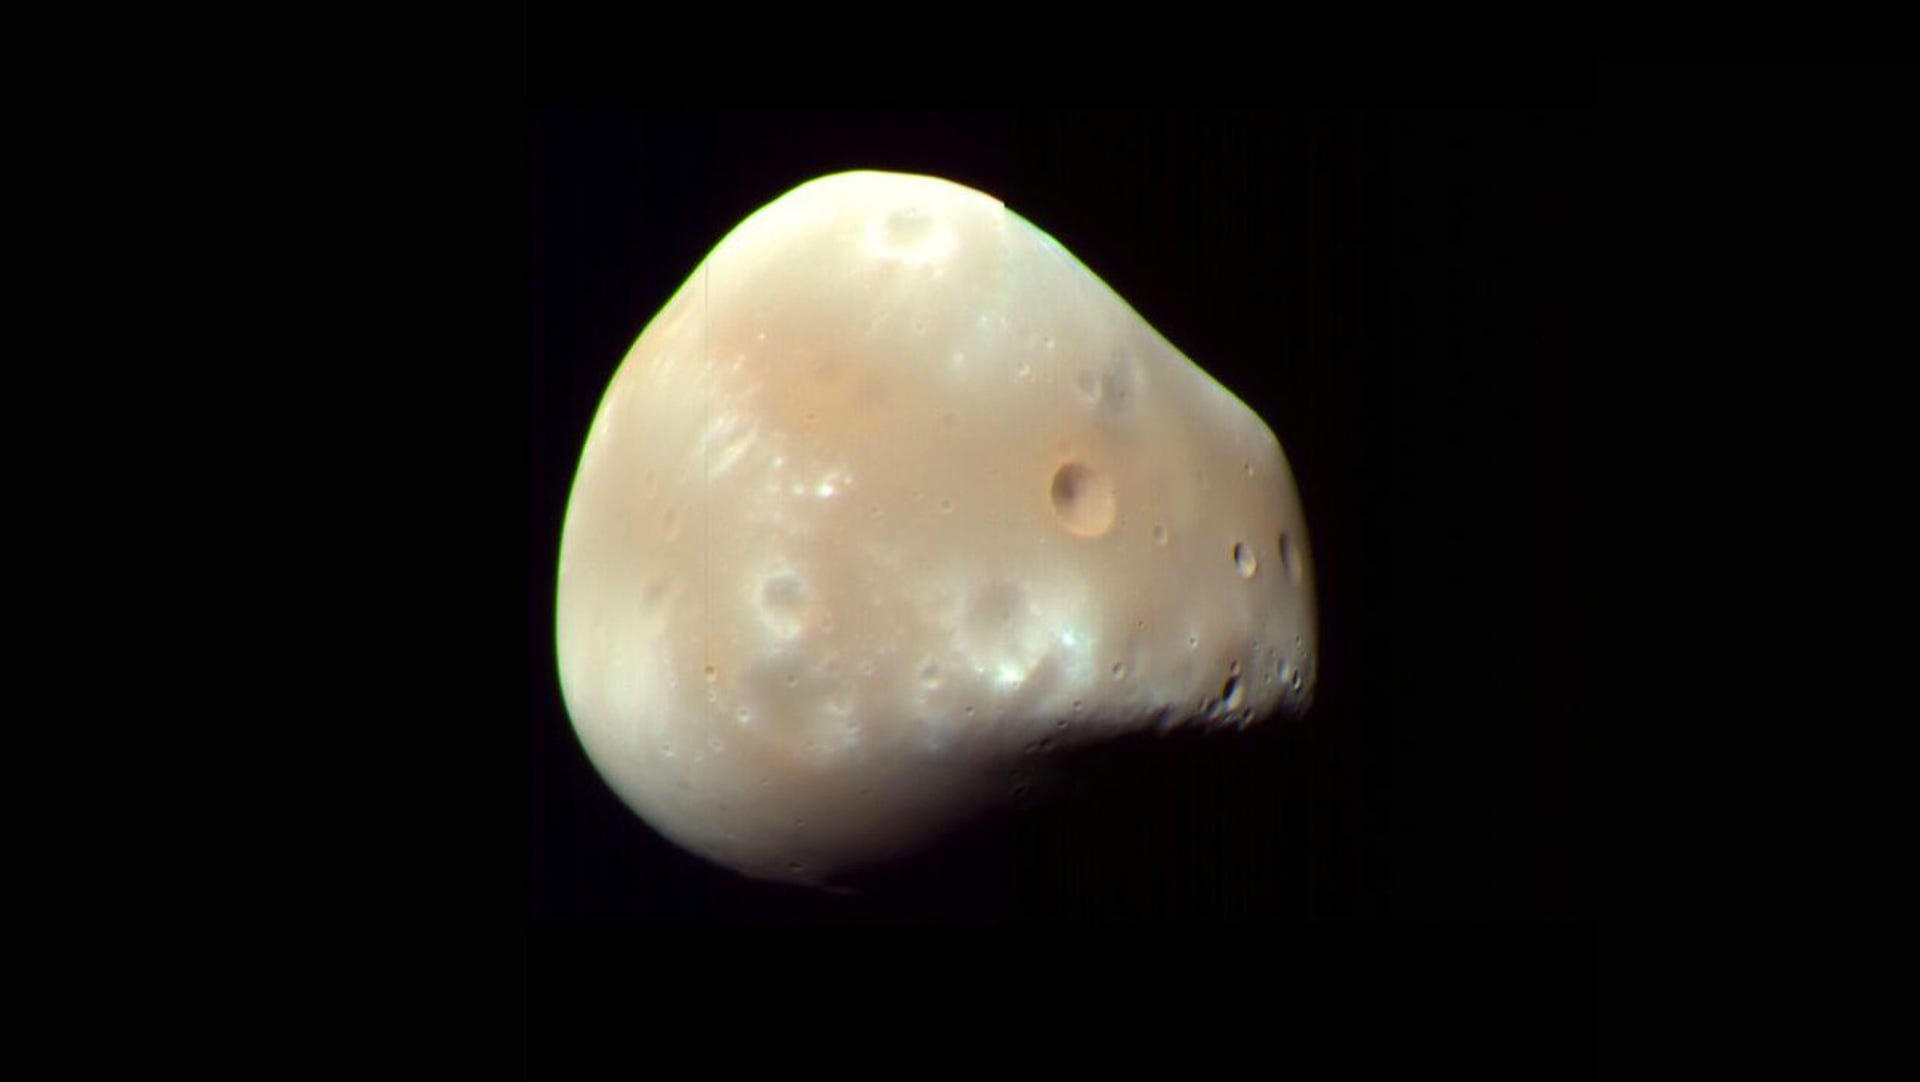 Lumpy, cratered little Mars moon Deimos against a black background.